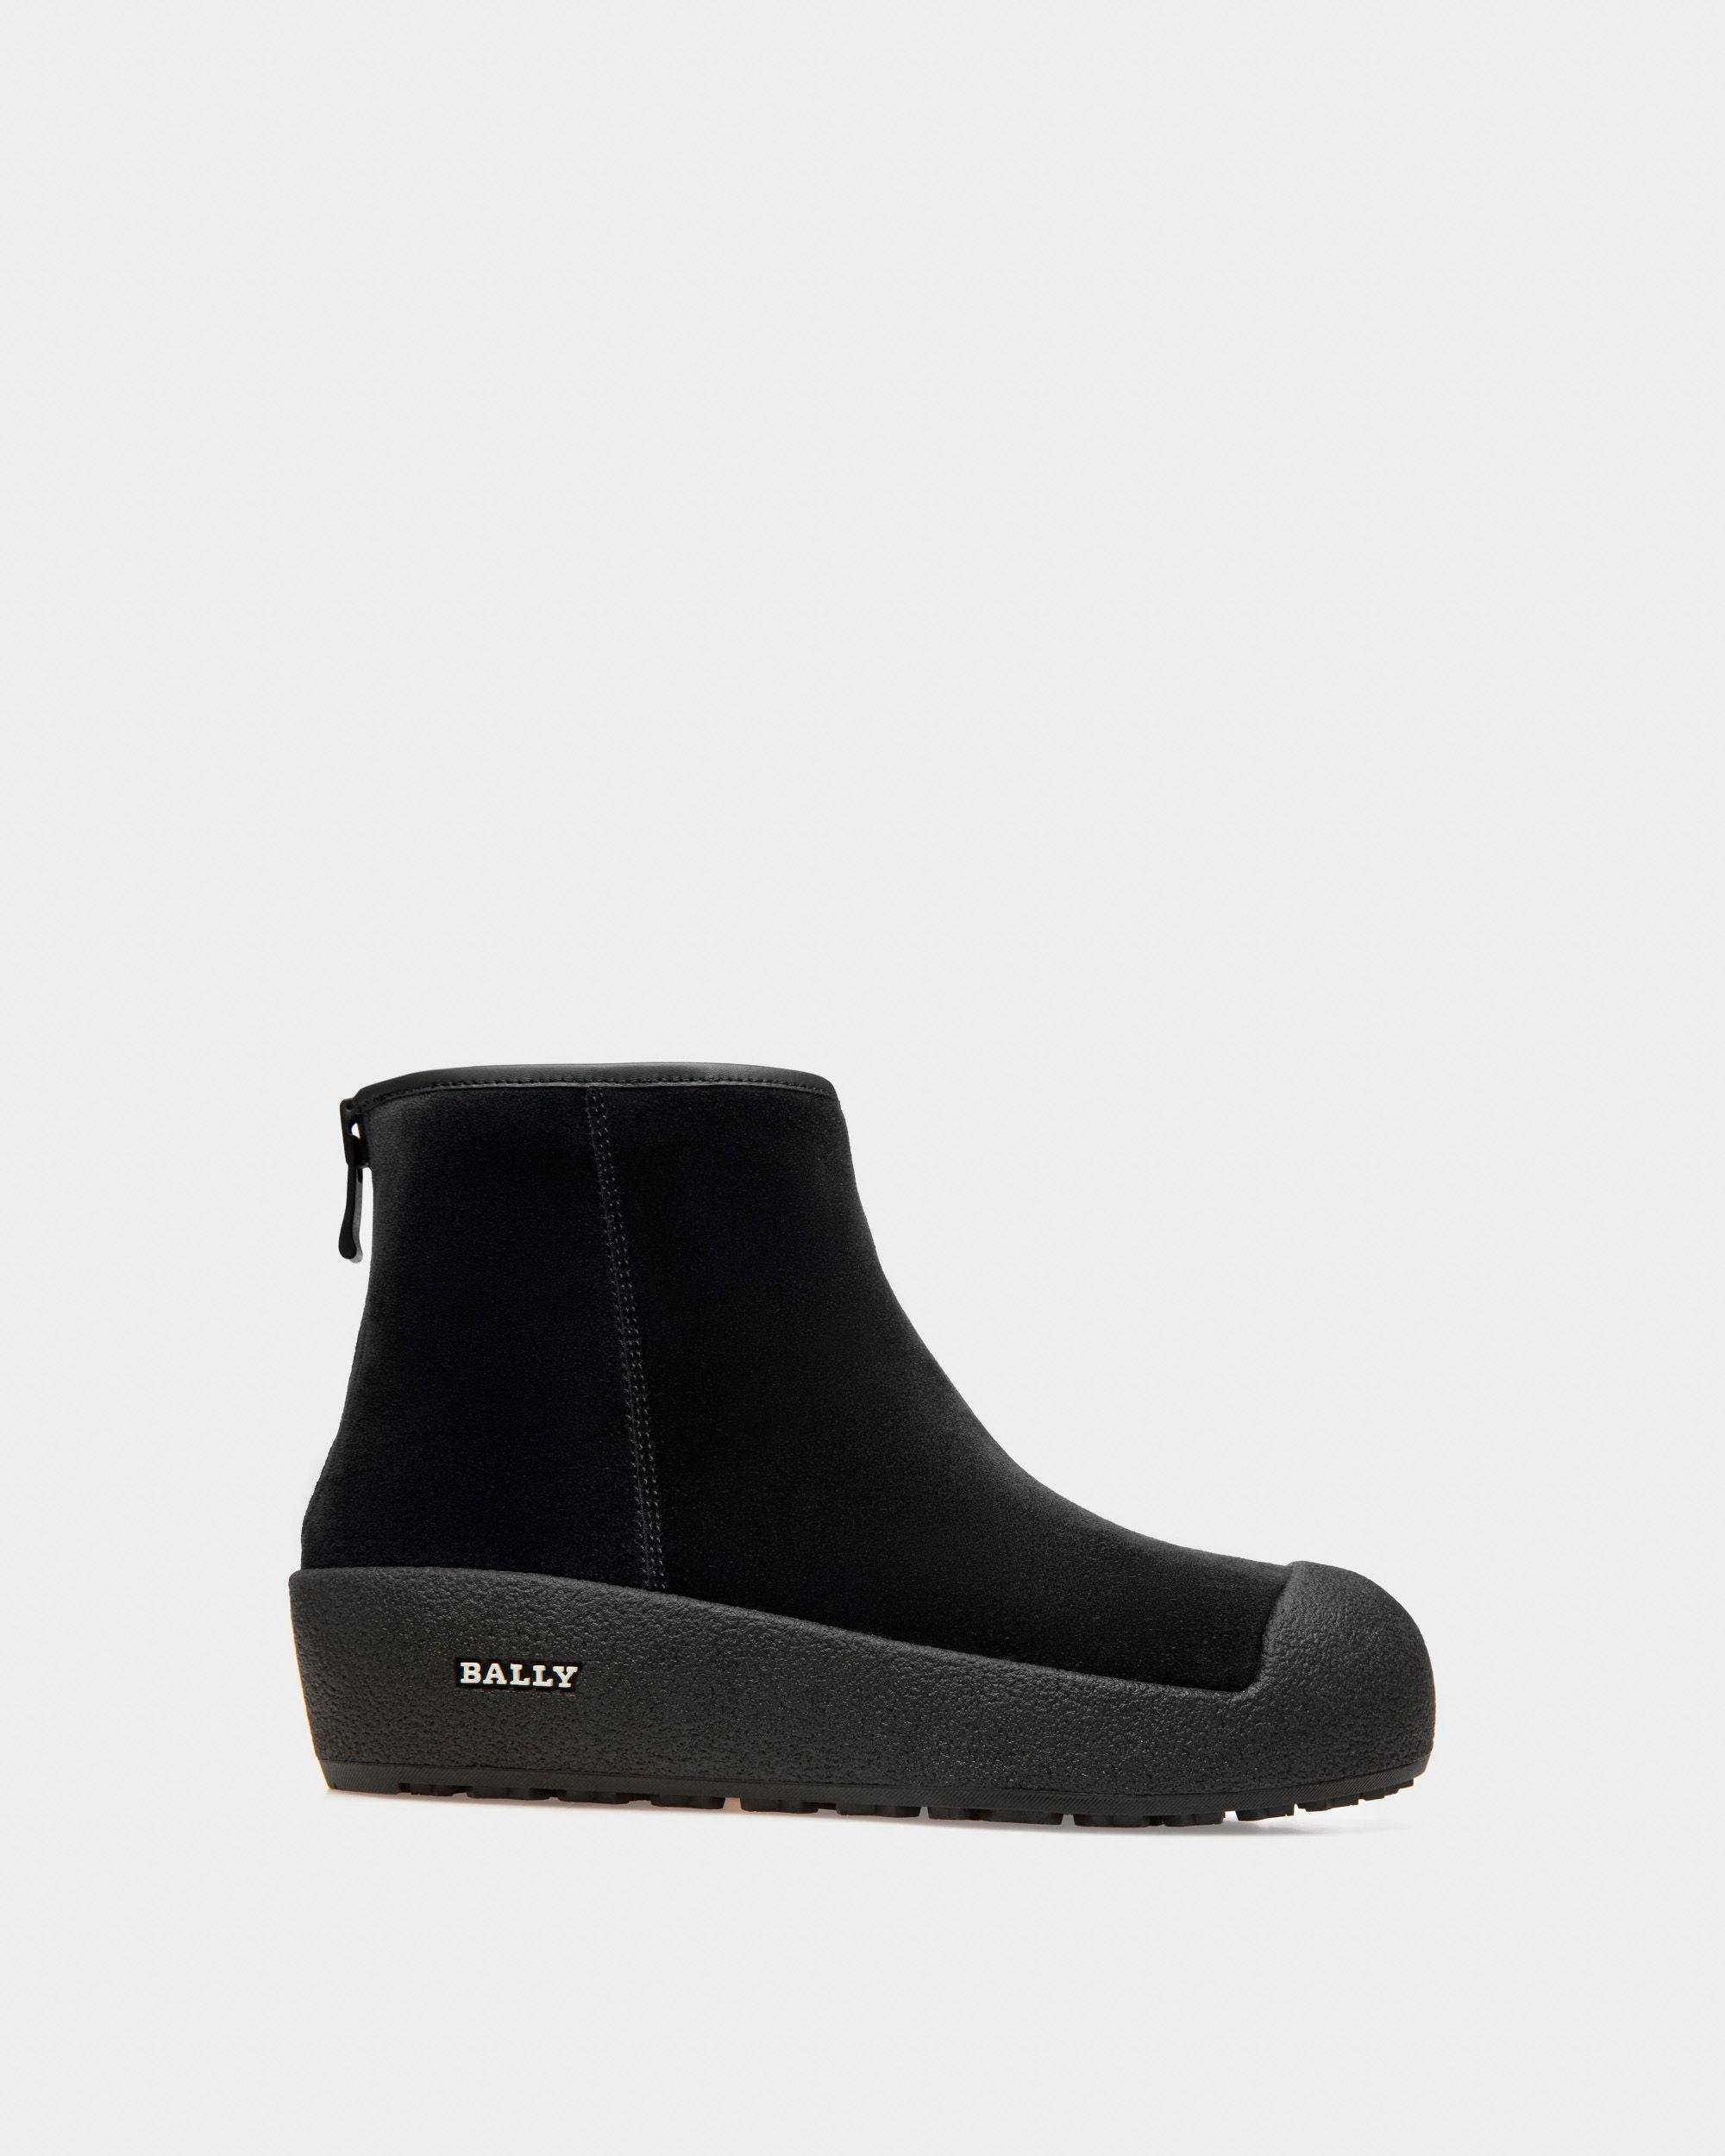 Guard | Men's Snow Boots | Black Leather | Bally